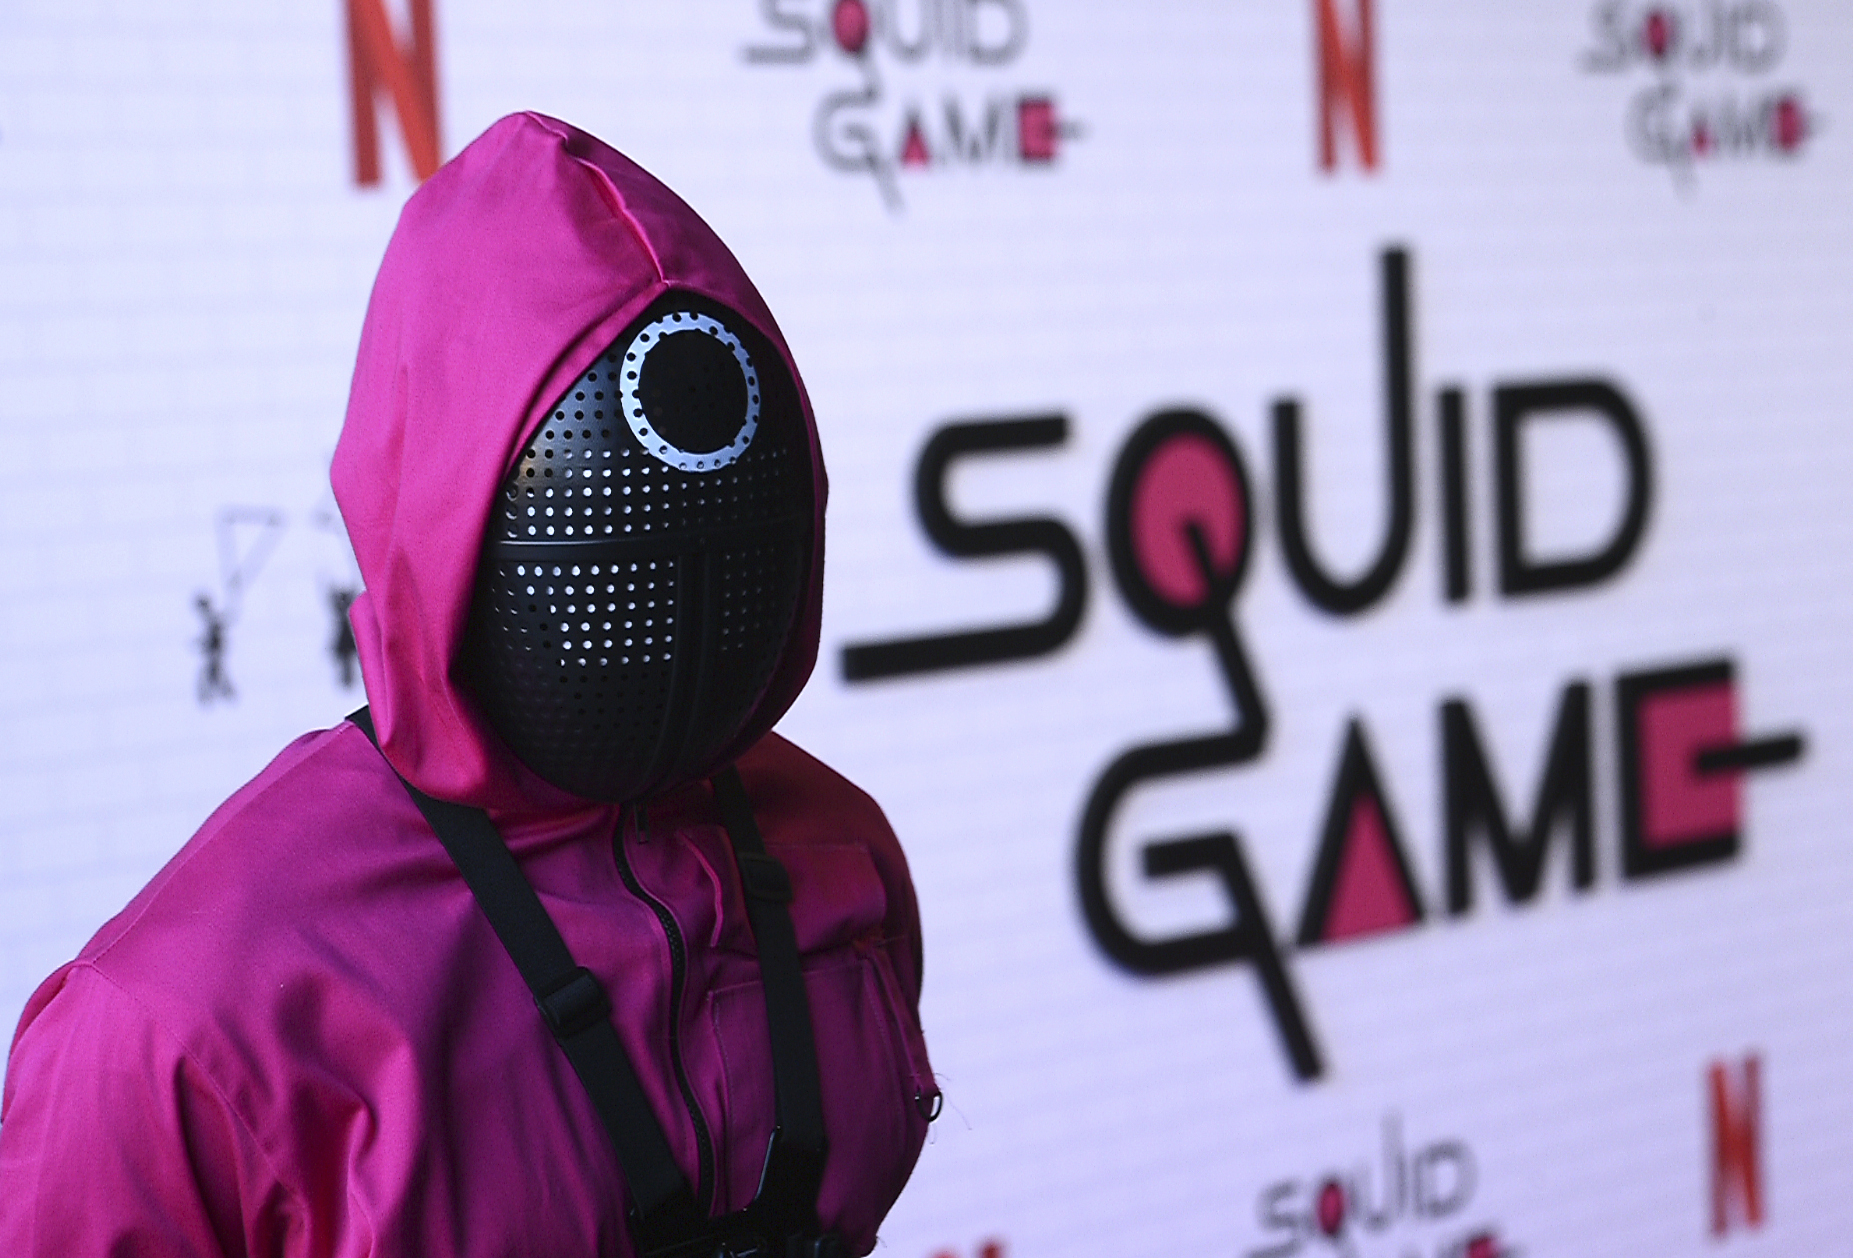 Squid game: The challenge's last episodes will be release at 12:00 a.m. PT/3:00 a.m. ET.